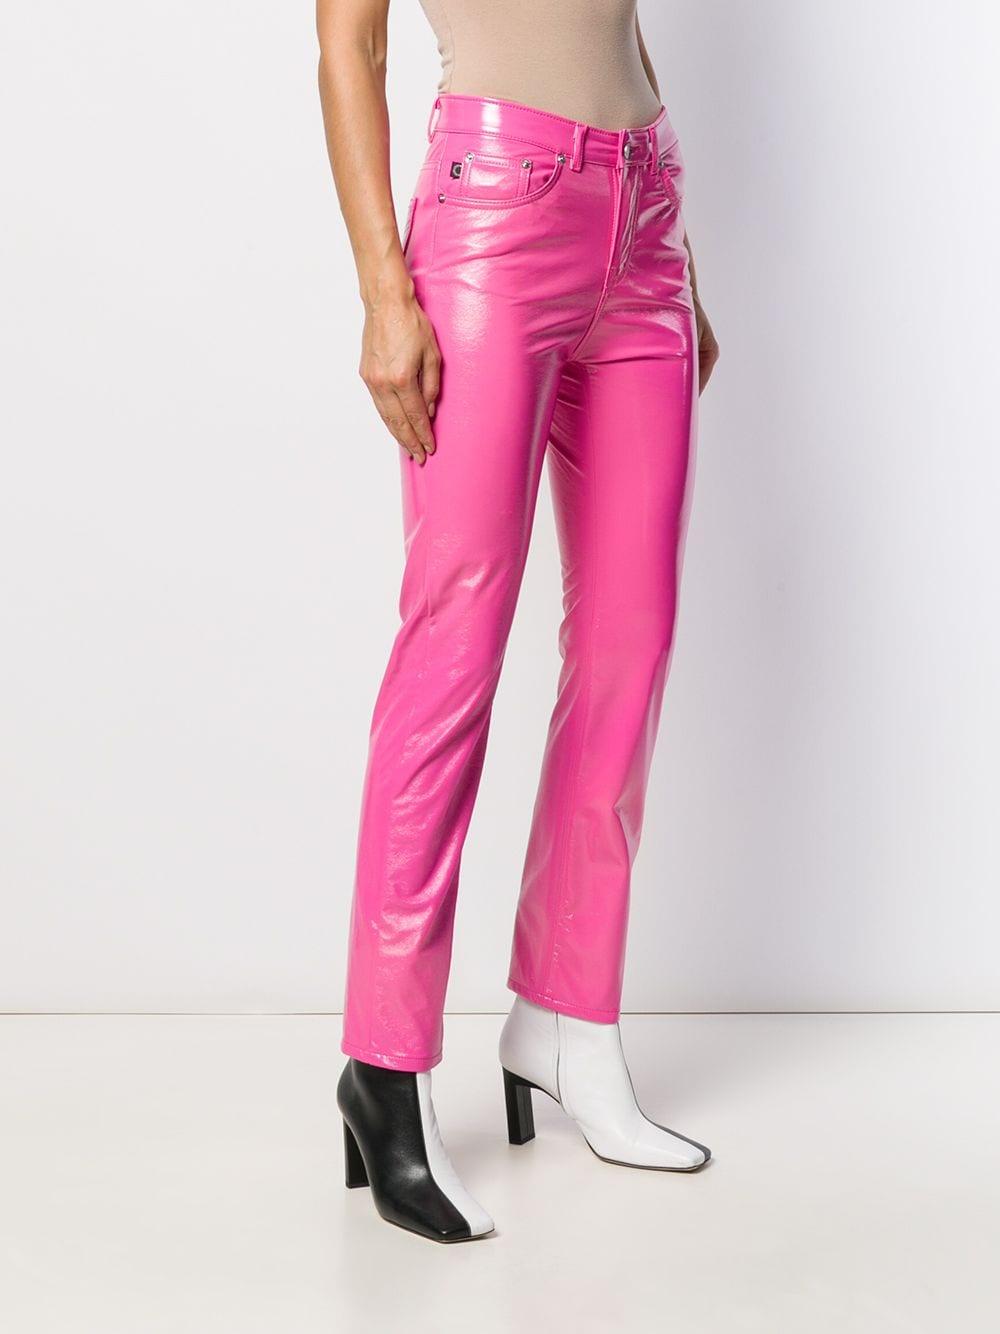 Fiorucci Yves Vinyl Trousers in Pink - Lyst